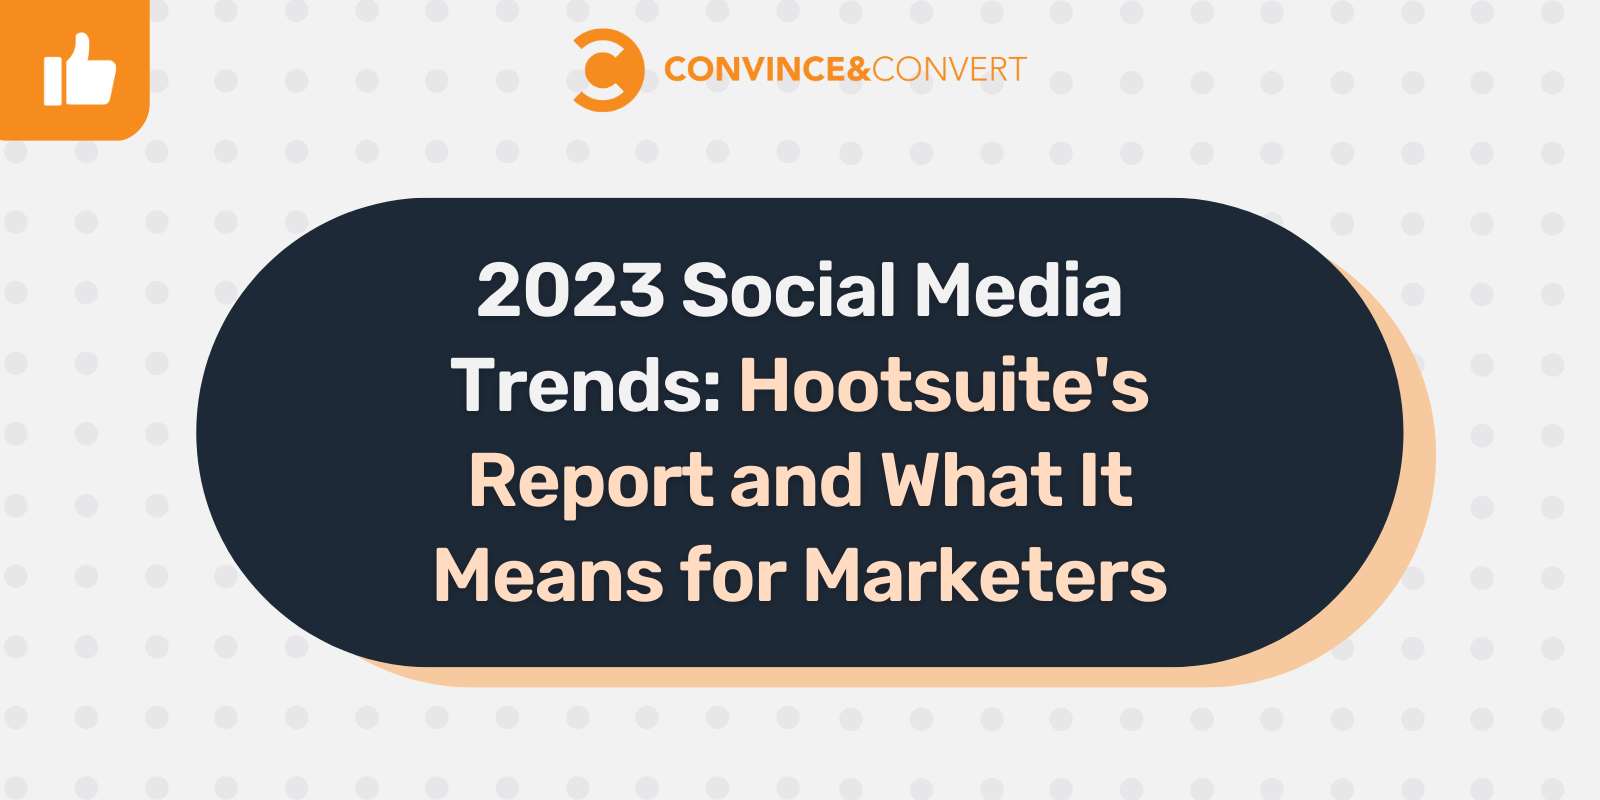 2023 Social Media Trends: Hootsuite’s Report and What It Means for Marketers